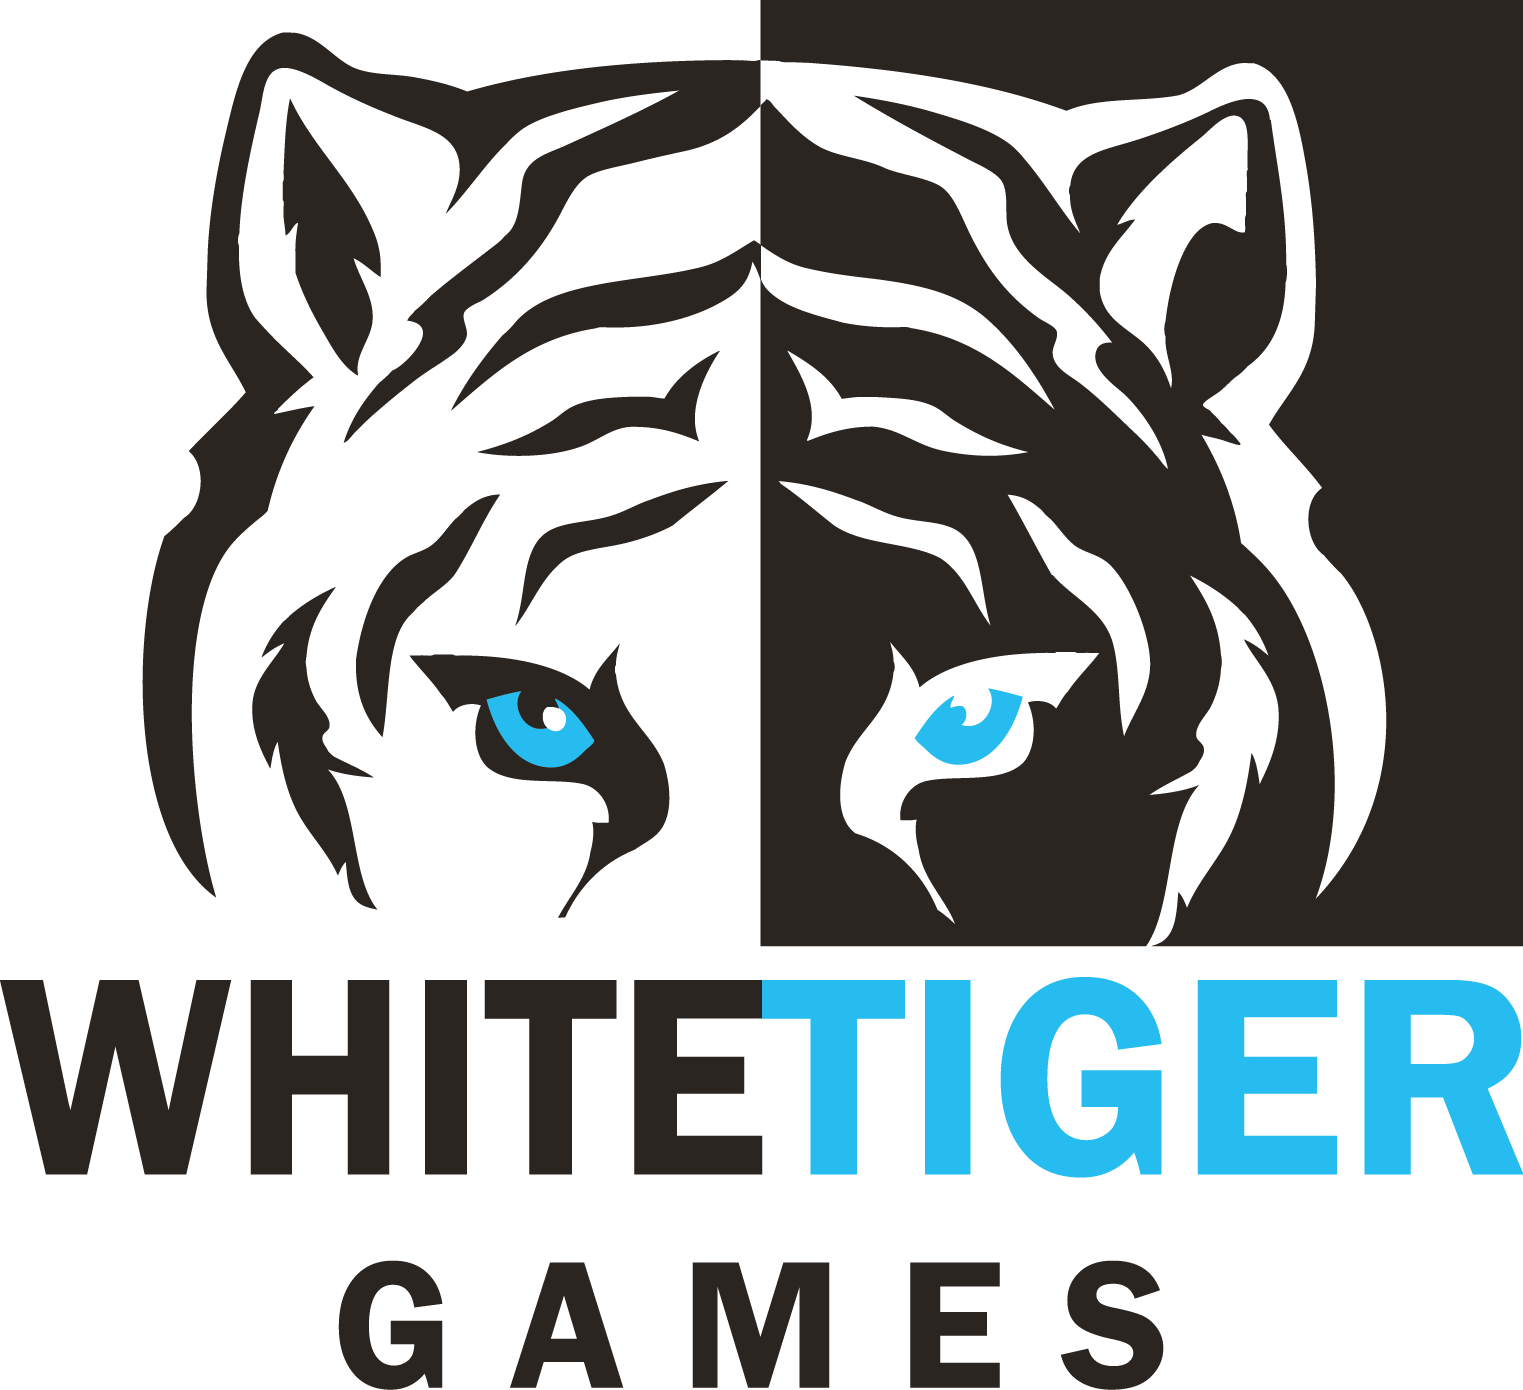 Whitetiger Games - Draw A Tiger Face (1523x1390)